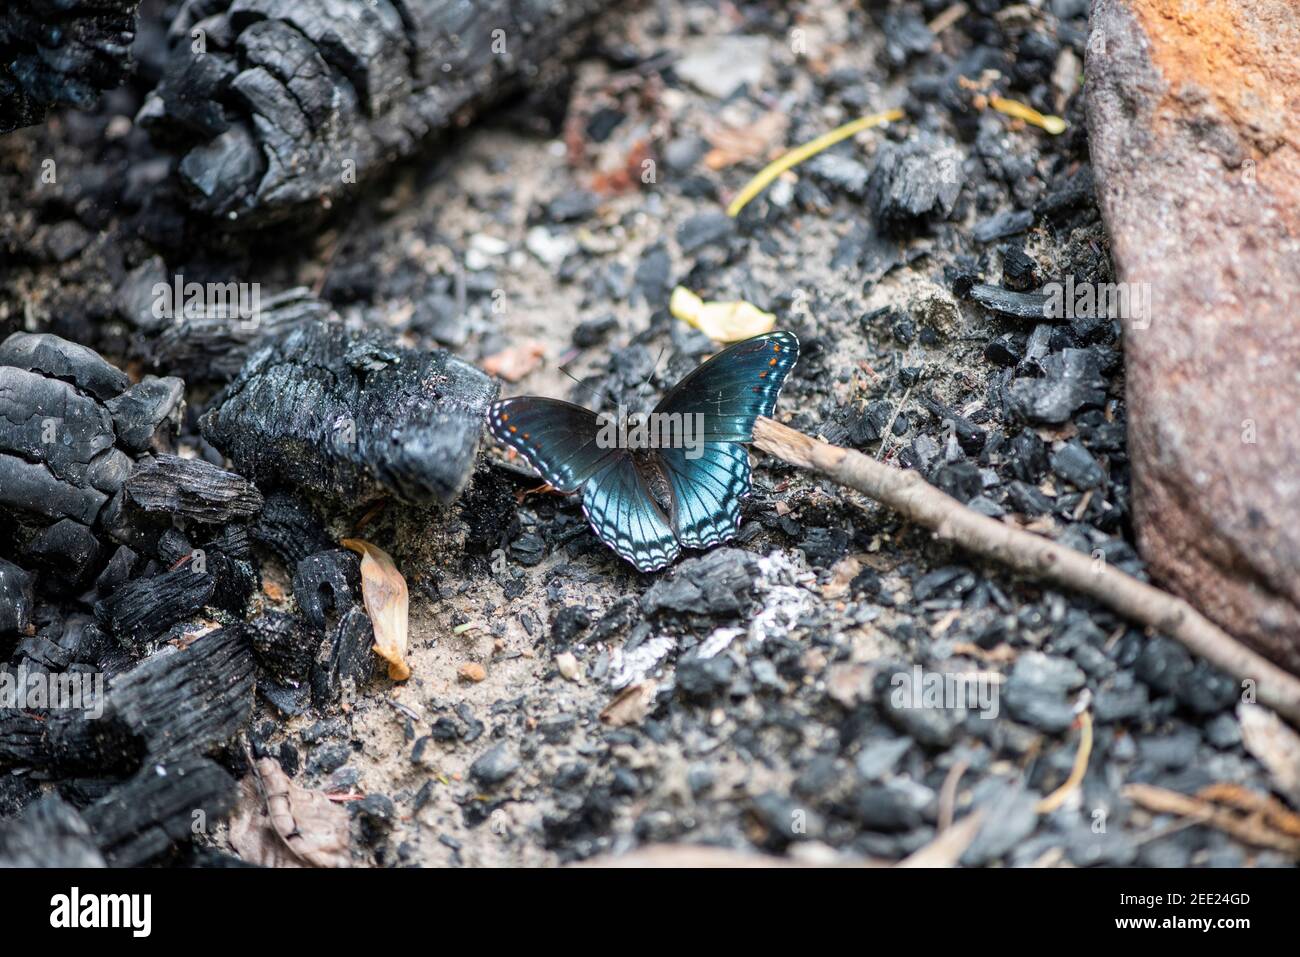 Limenitis arthemis, the red-spotted purple or white admiral, is a North American butterfly species in the cosmopolitan genus Limenitis. Stock Photo